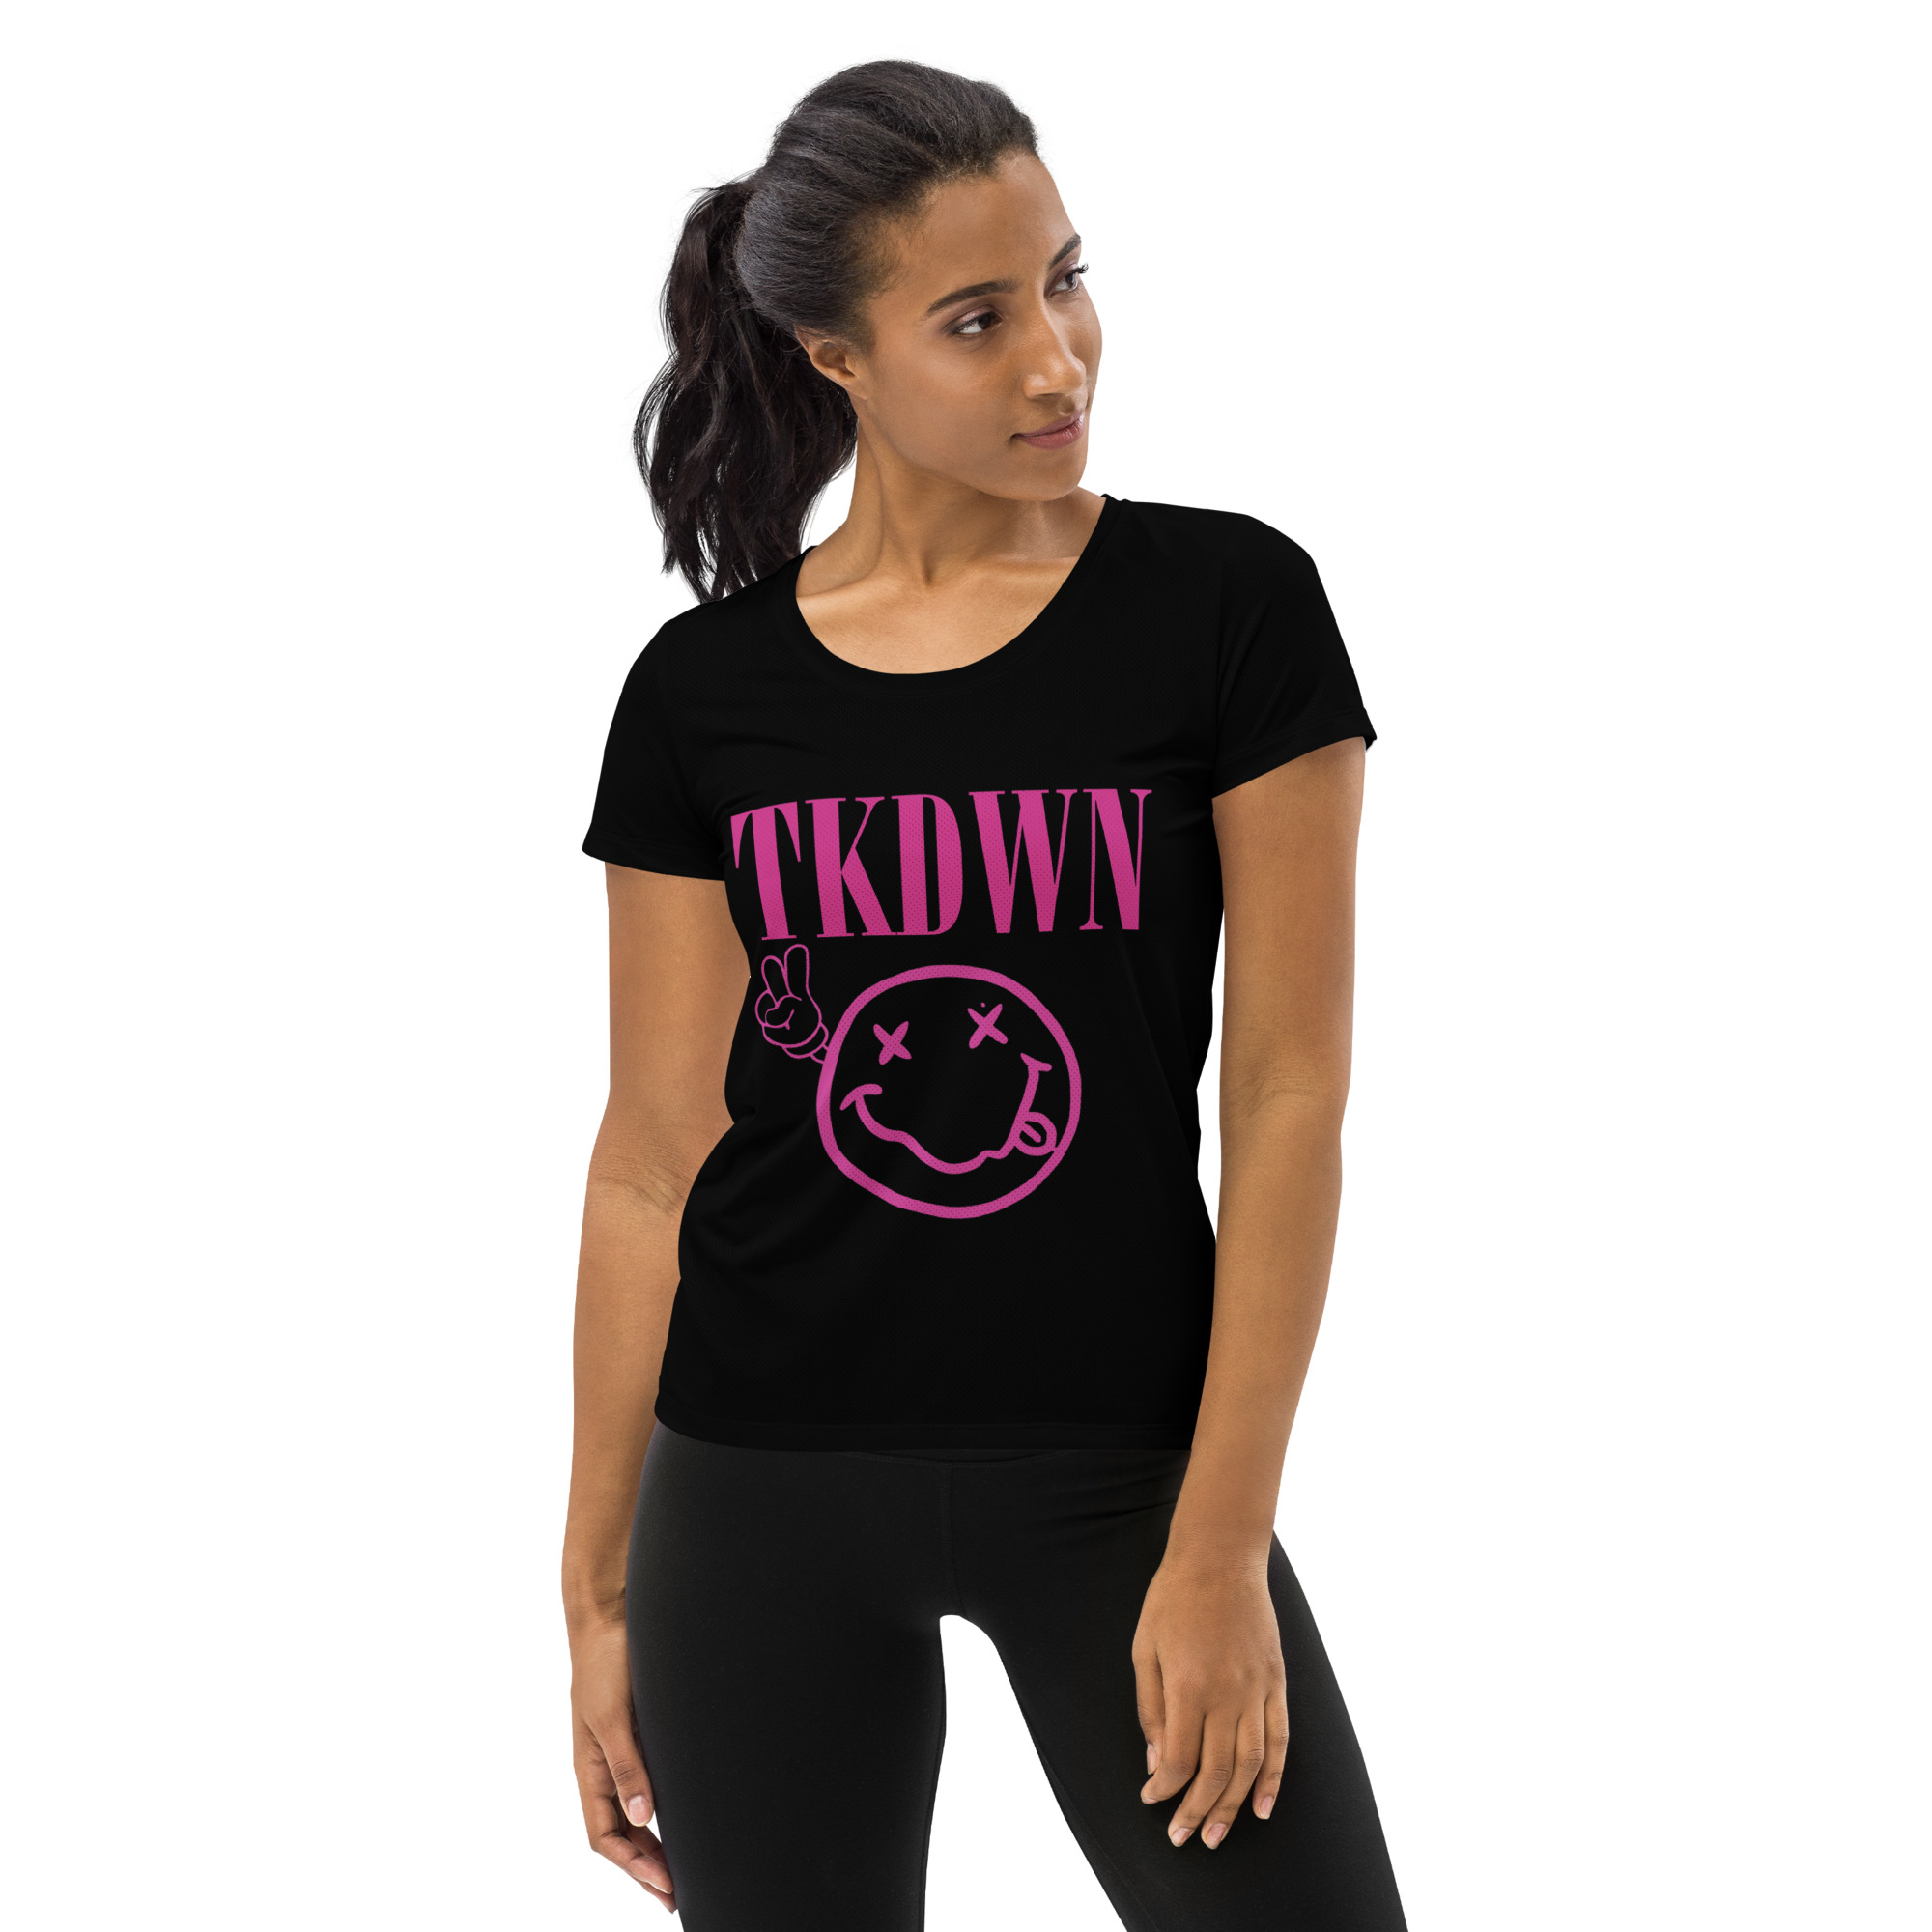 TKDWN Two Fingers All-Over Print Women’s Athletic T-shirt